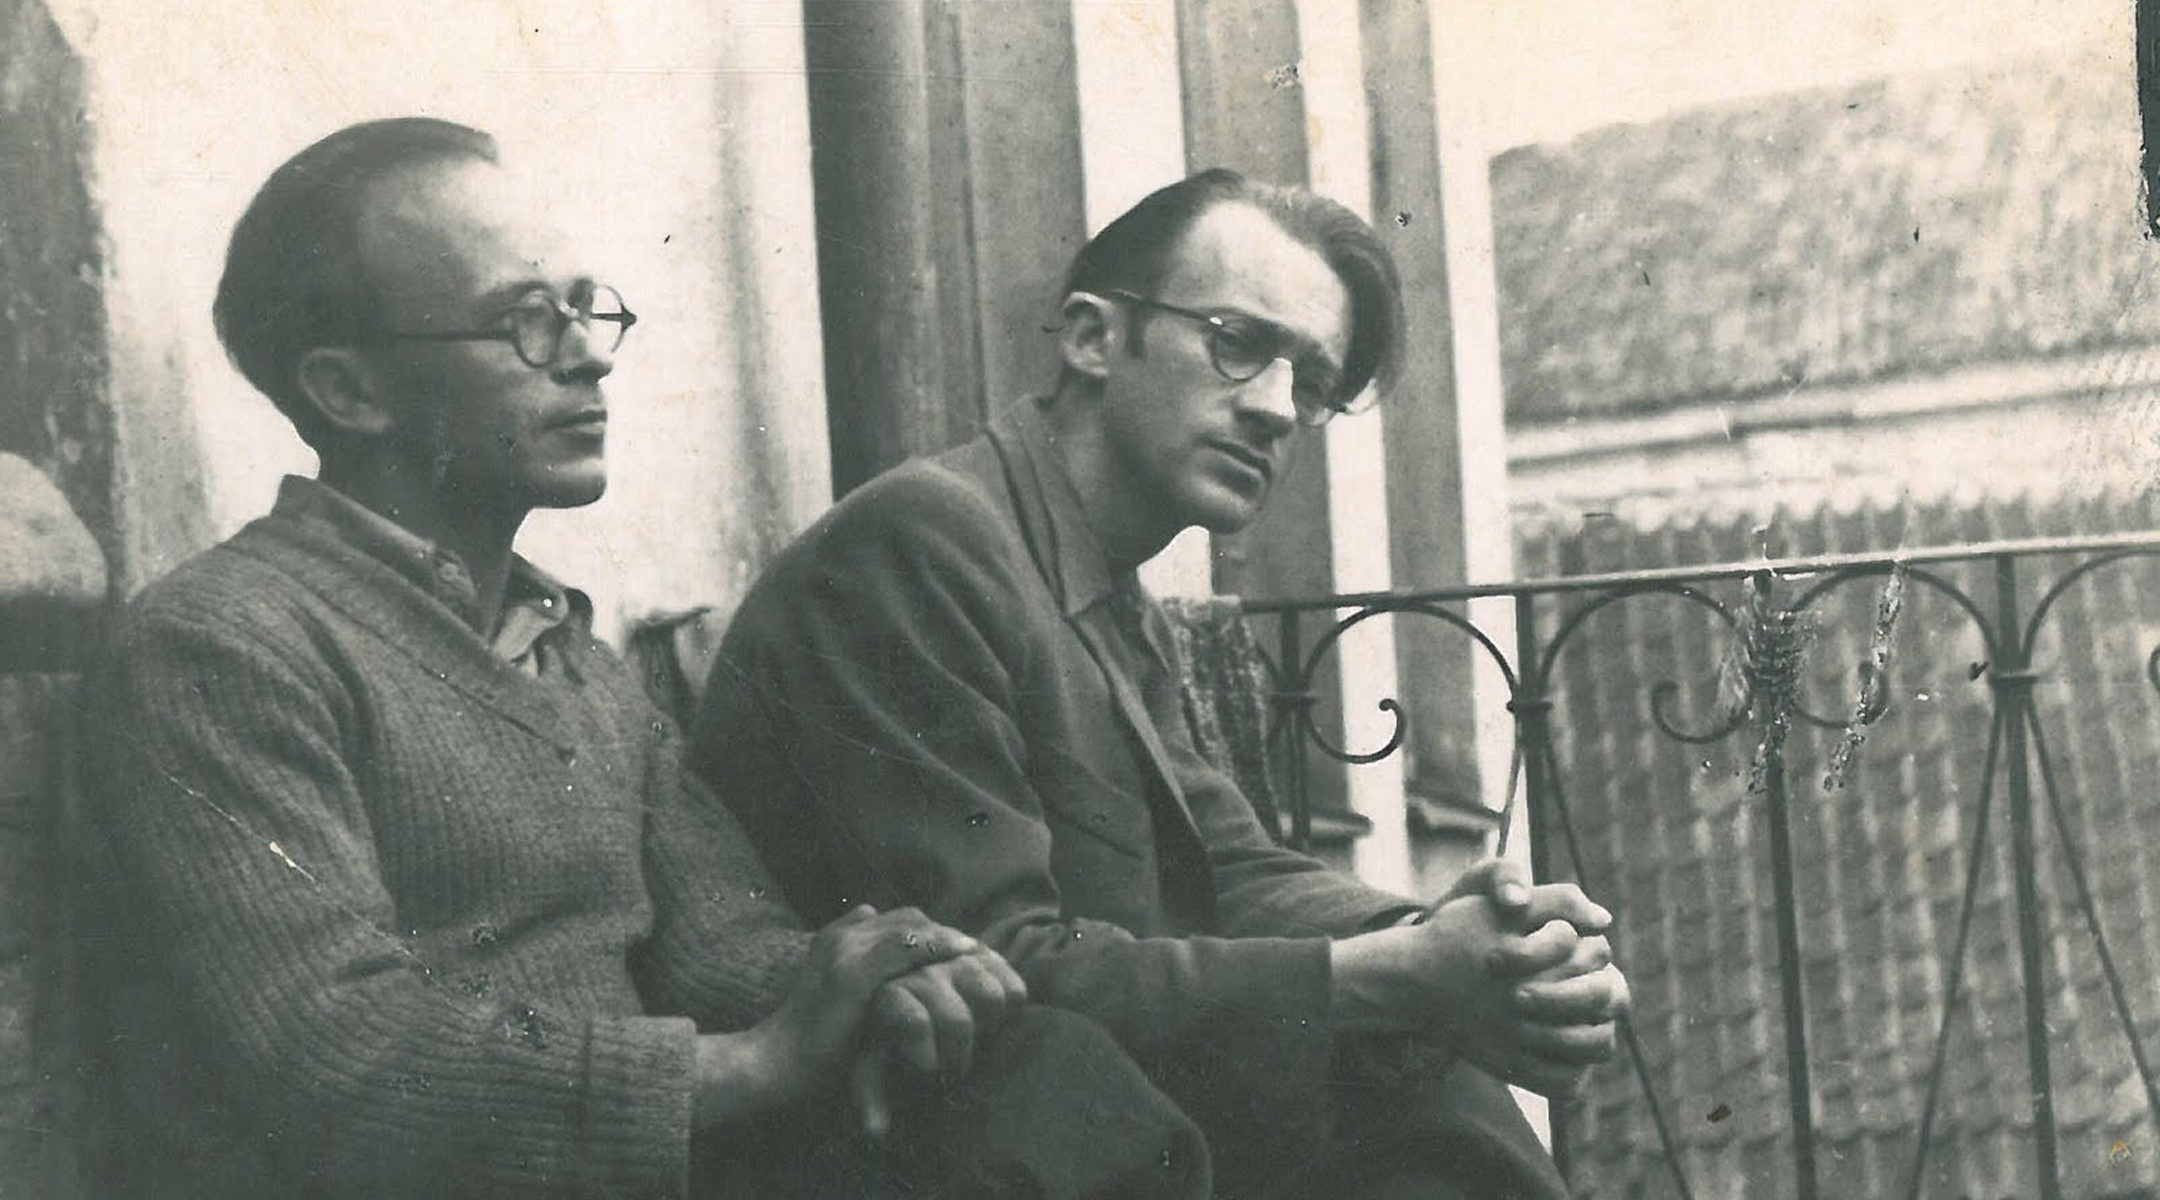 Abraham Sutzkever, right, before World War II in Vilnius, Lithuania. (Courtesy photo)